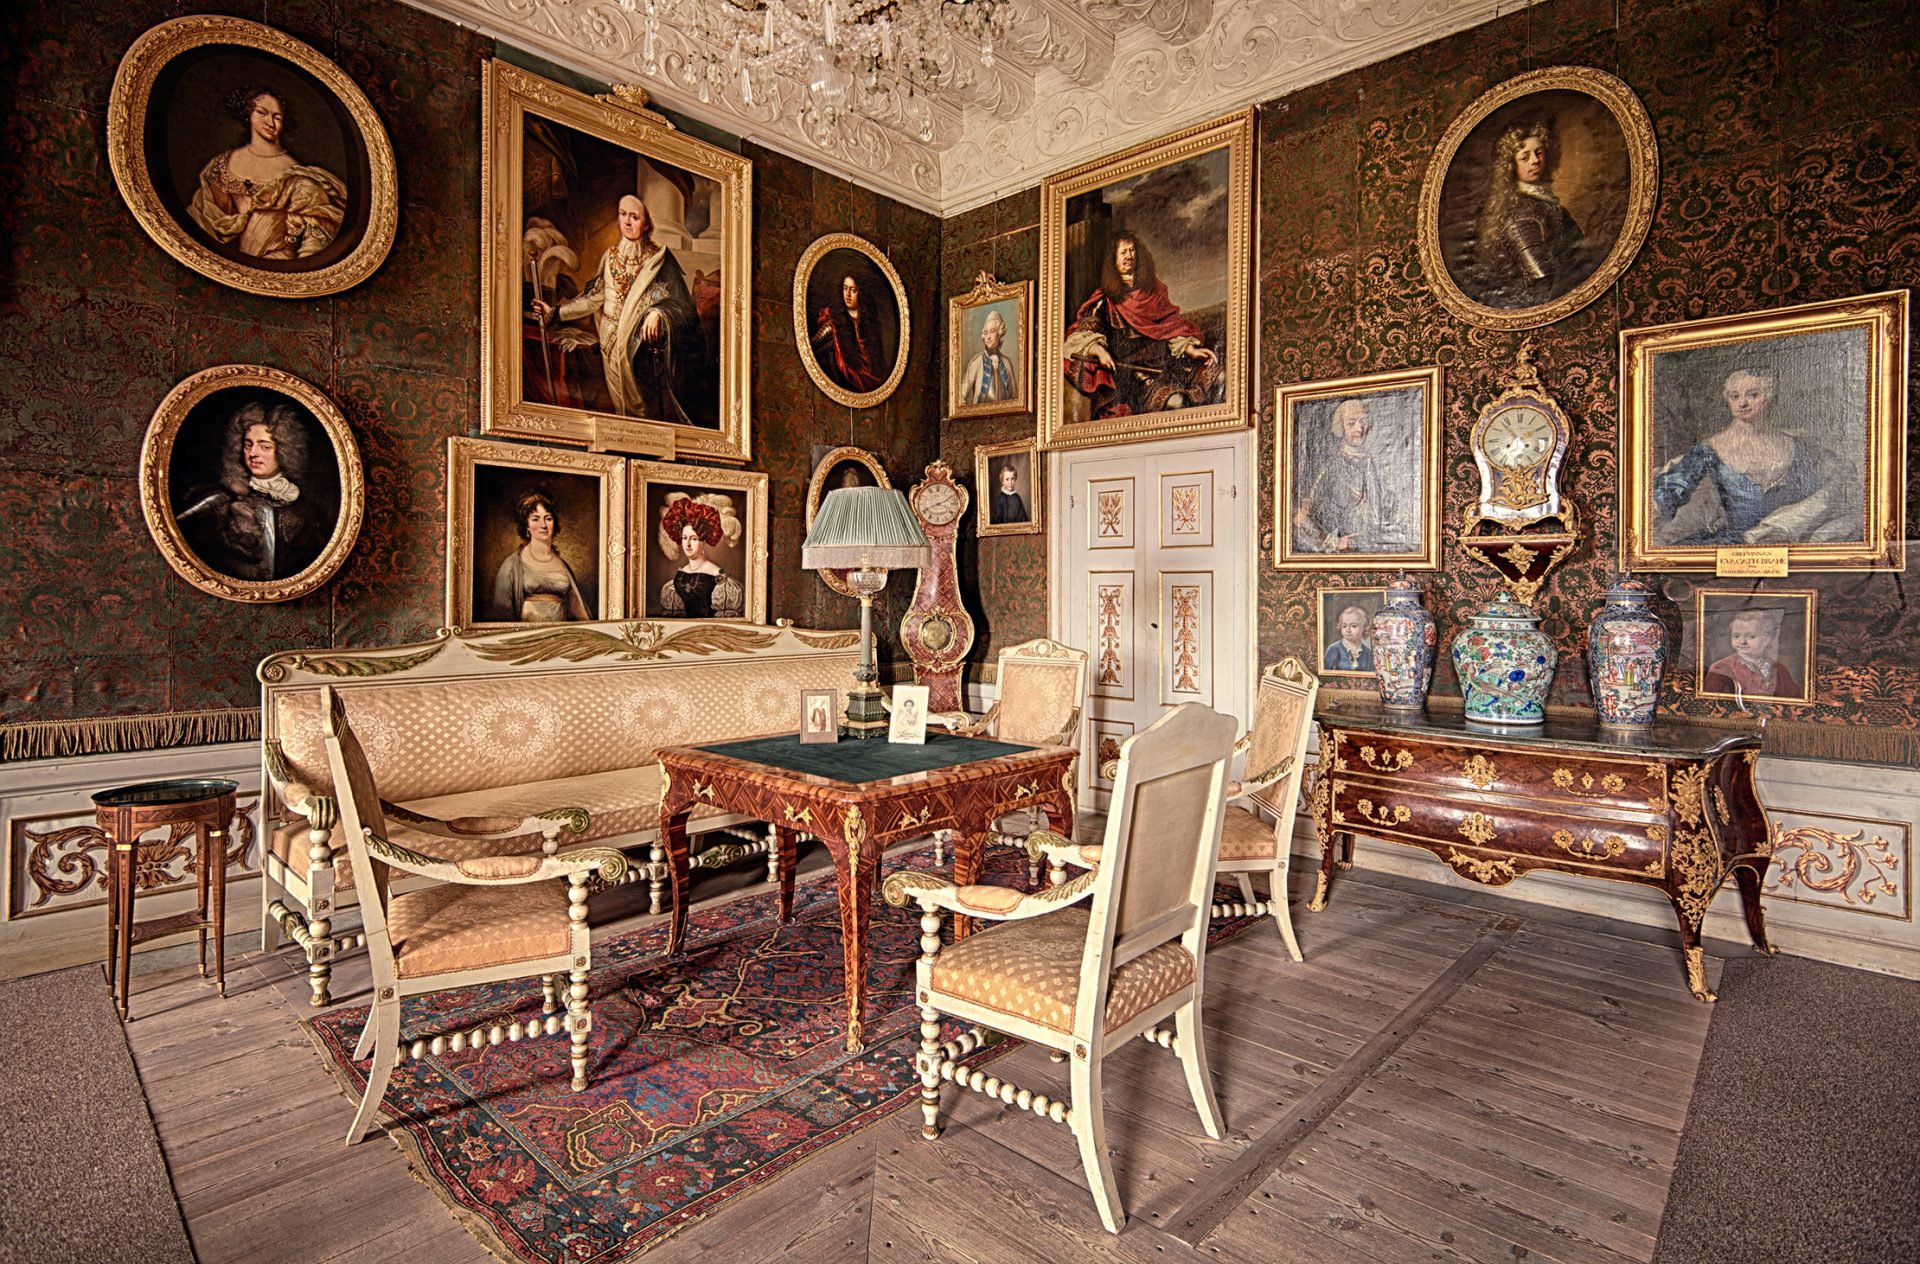 A densly decorated room with a multitude of paintings and furniture.